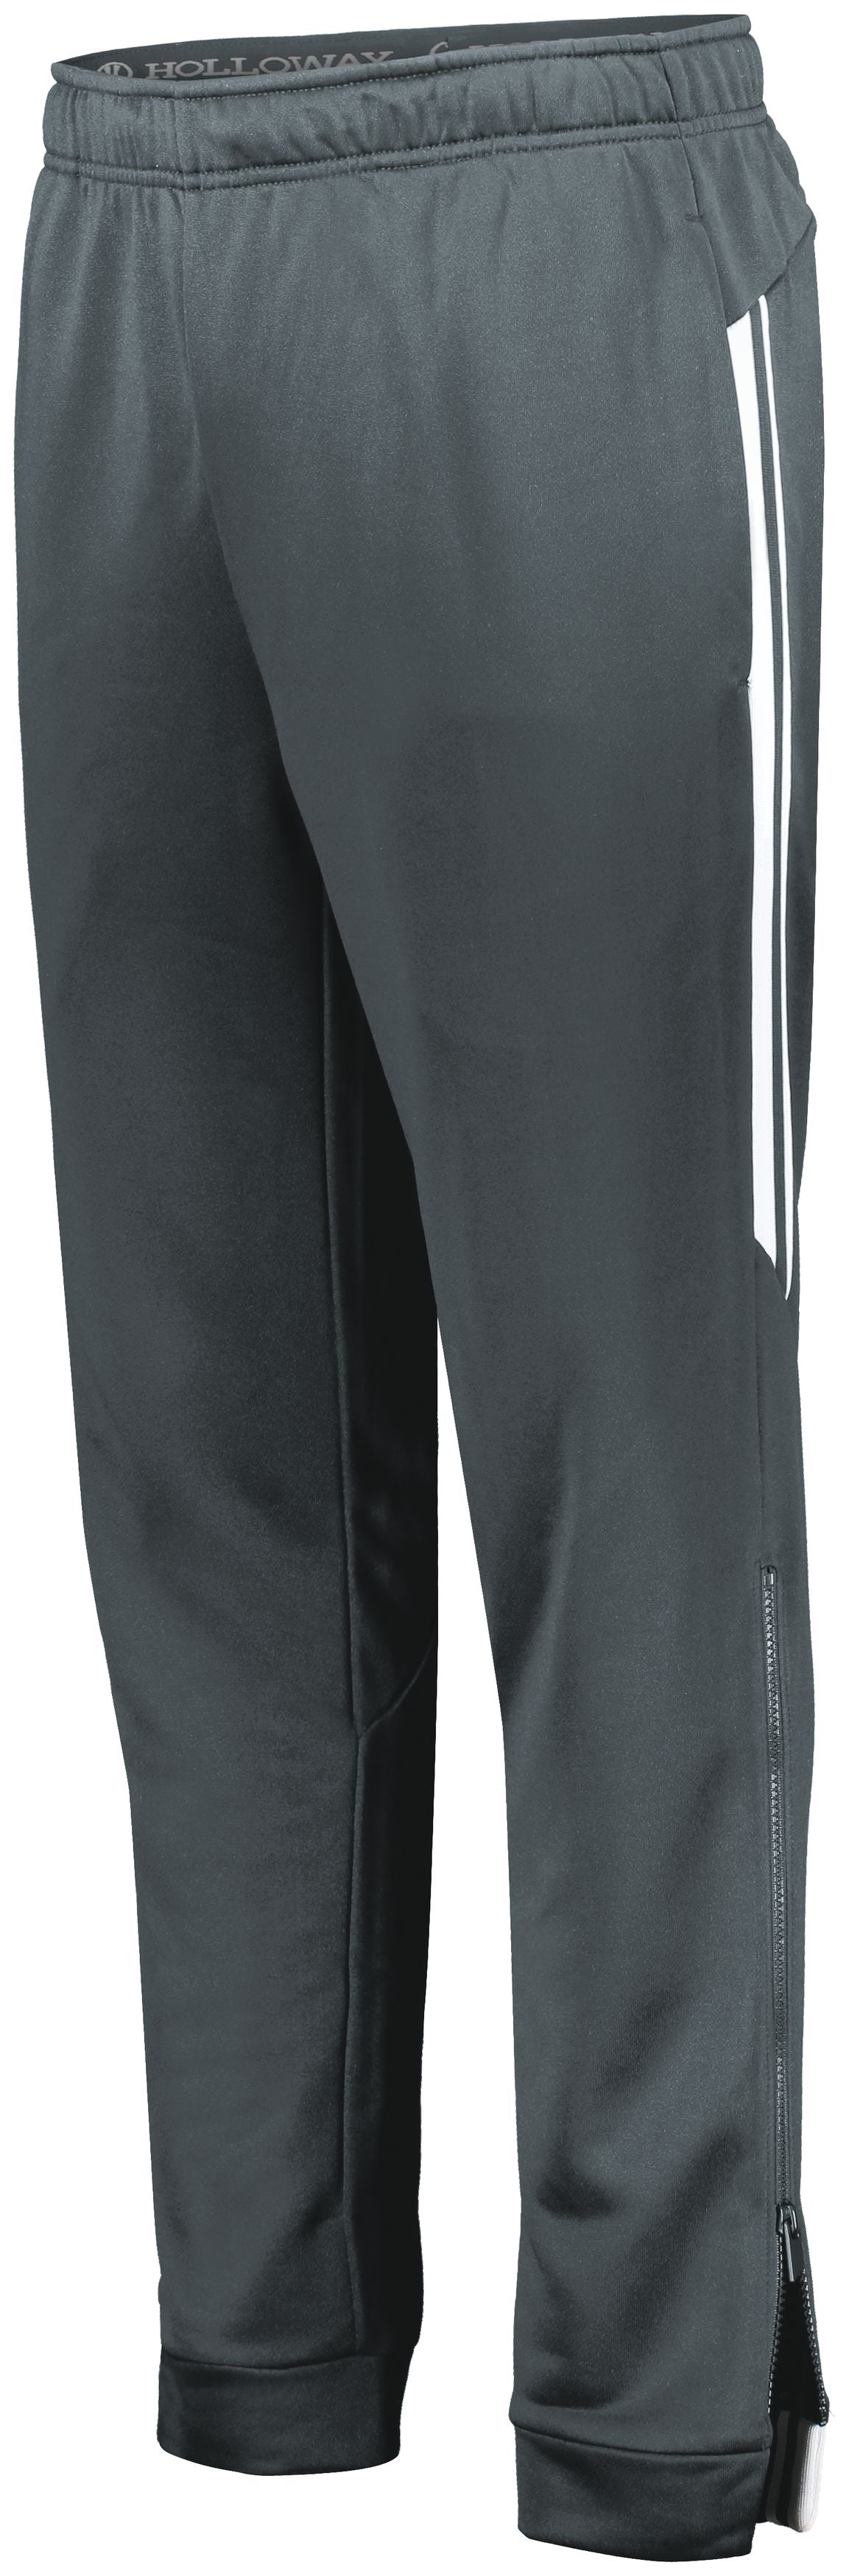 Holloway Retro Grade Pant in Graphite/White  -Part of the Adult, Adult-Pants, Pants, Holloway product lines at KanaleyCreations.com